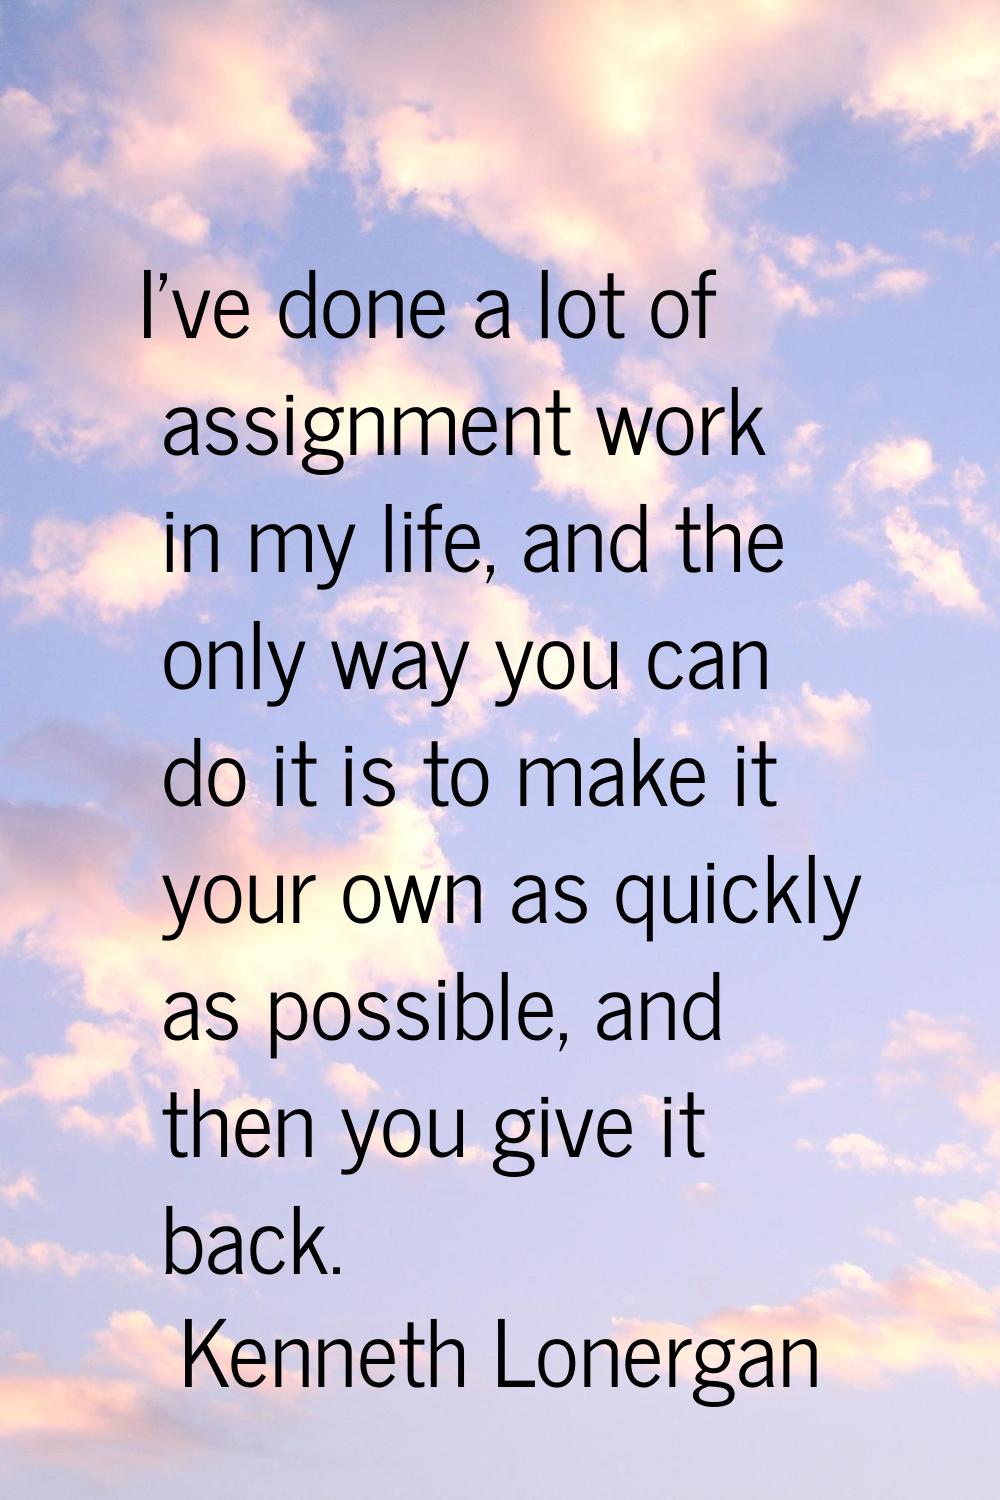 I've done a lot of assignment work in my life, and the only way you can do it is to make it your ow